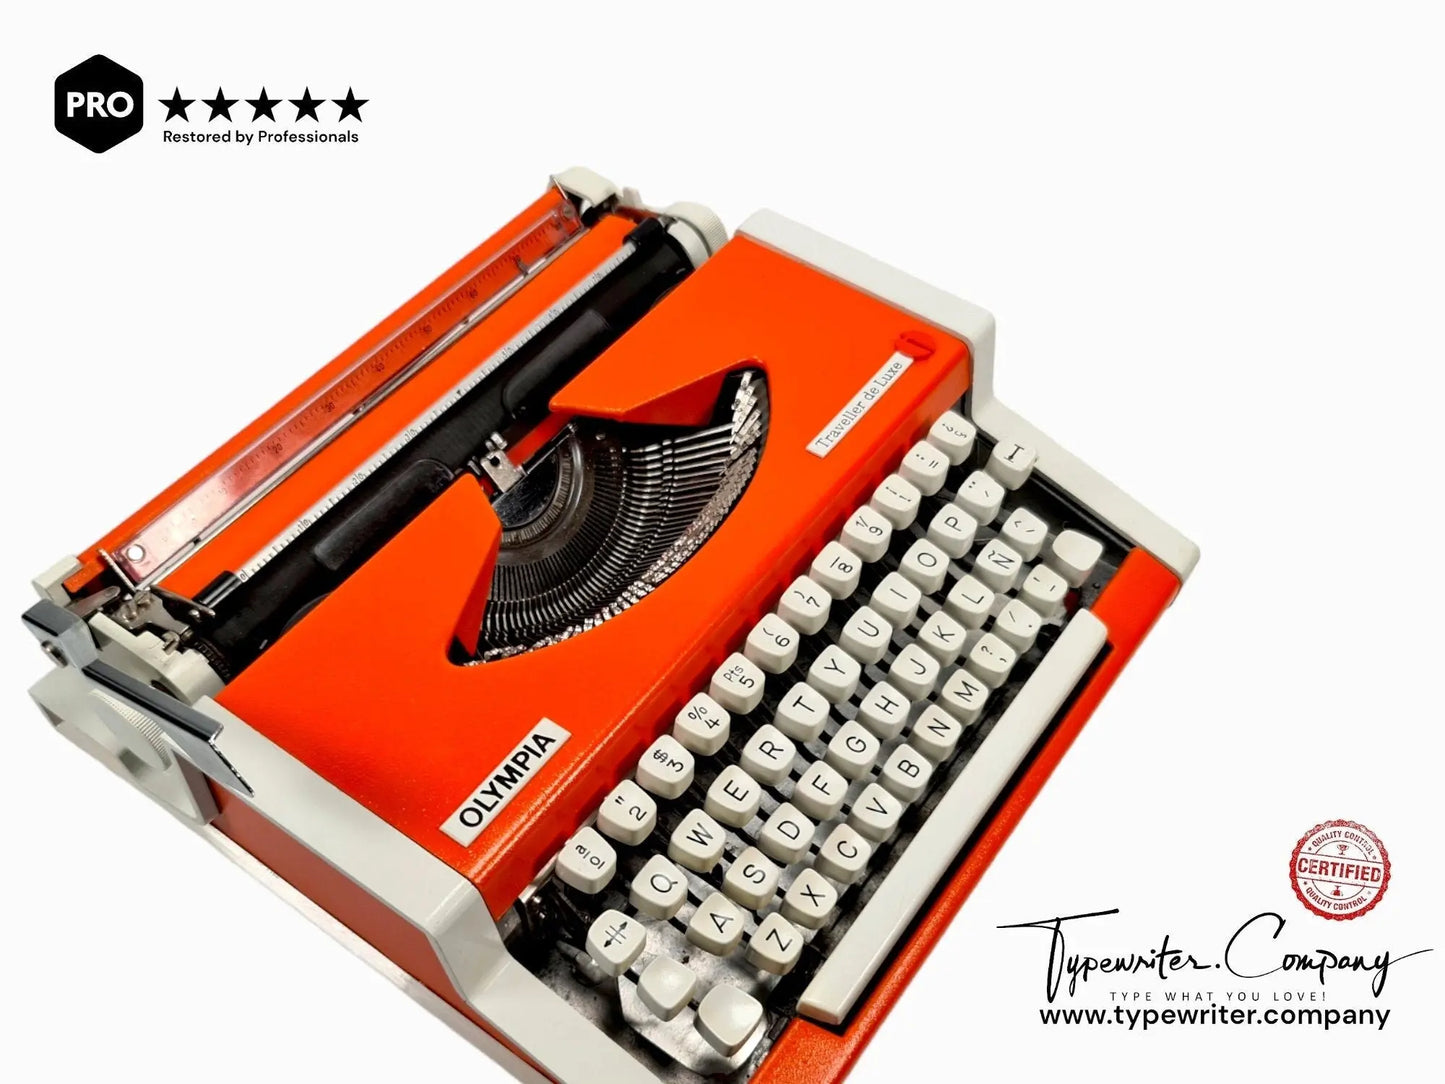 Olympia Traveller de Luxe Orange Typewriter, Vintage, Mint Condition, Manual Portable, Professionally Serviced by Typewriter.Company - ElGranero Typewriter.Company